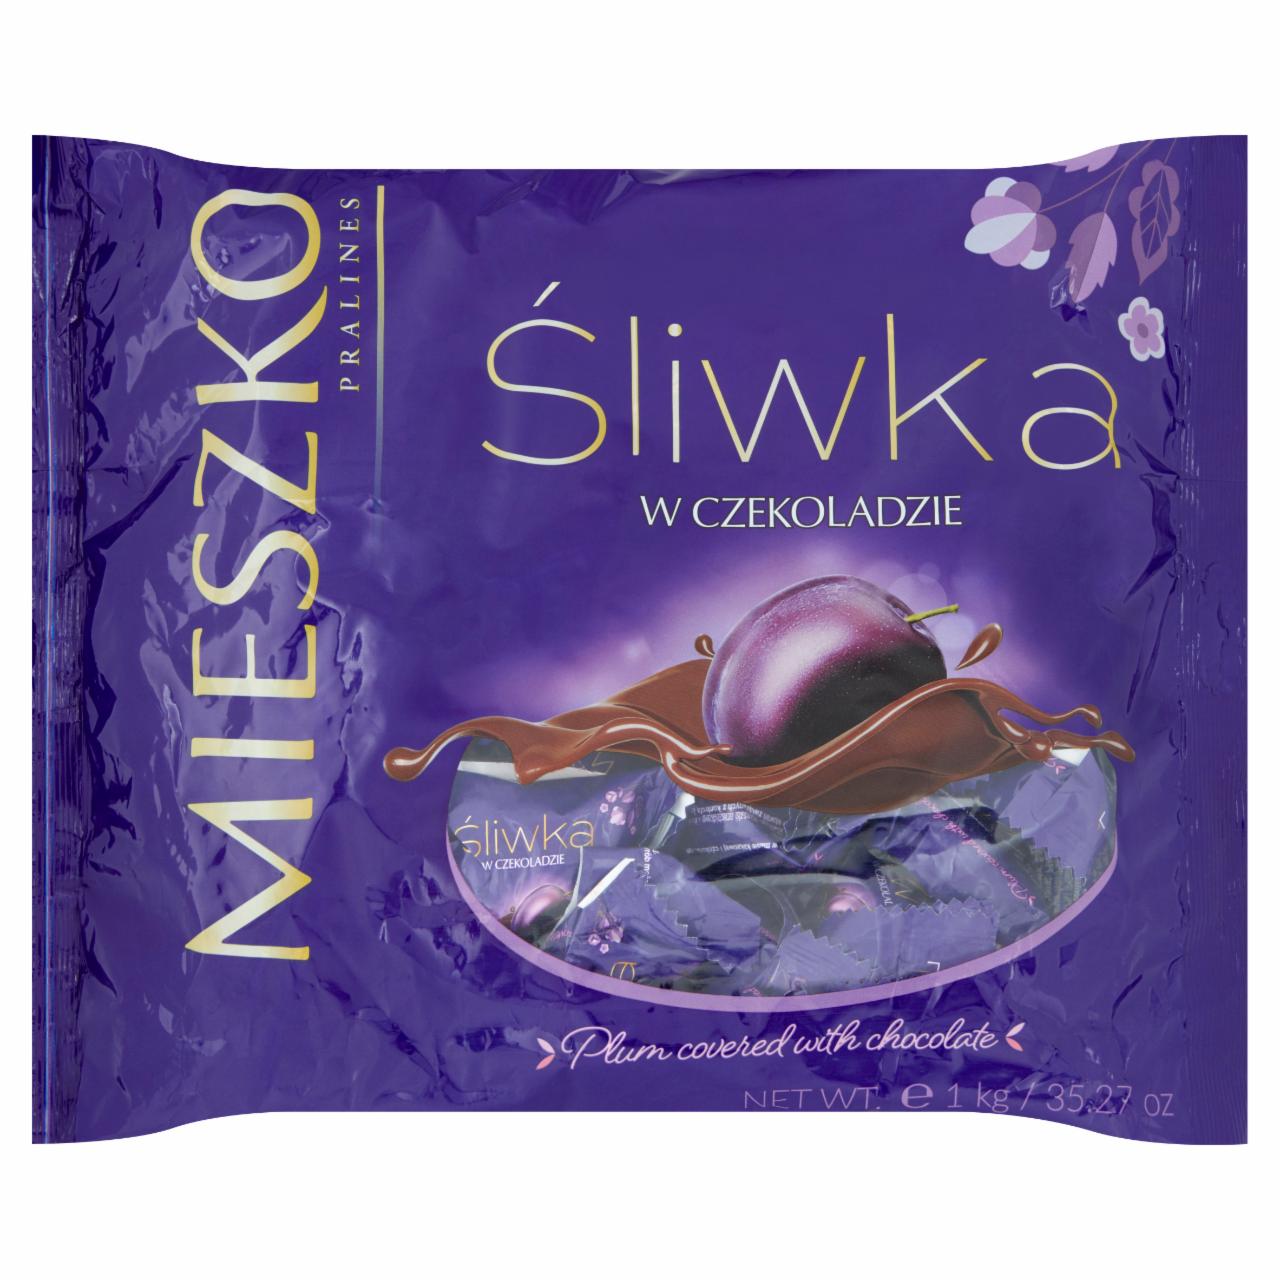 Photo - Mieszko Plum Covered with Chocolate 1 kg